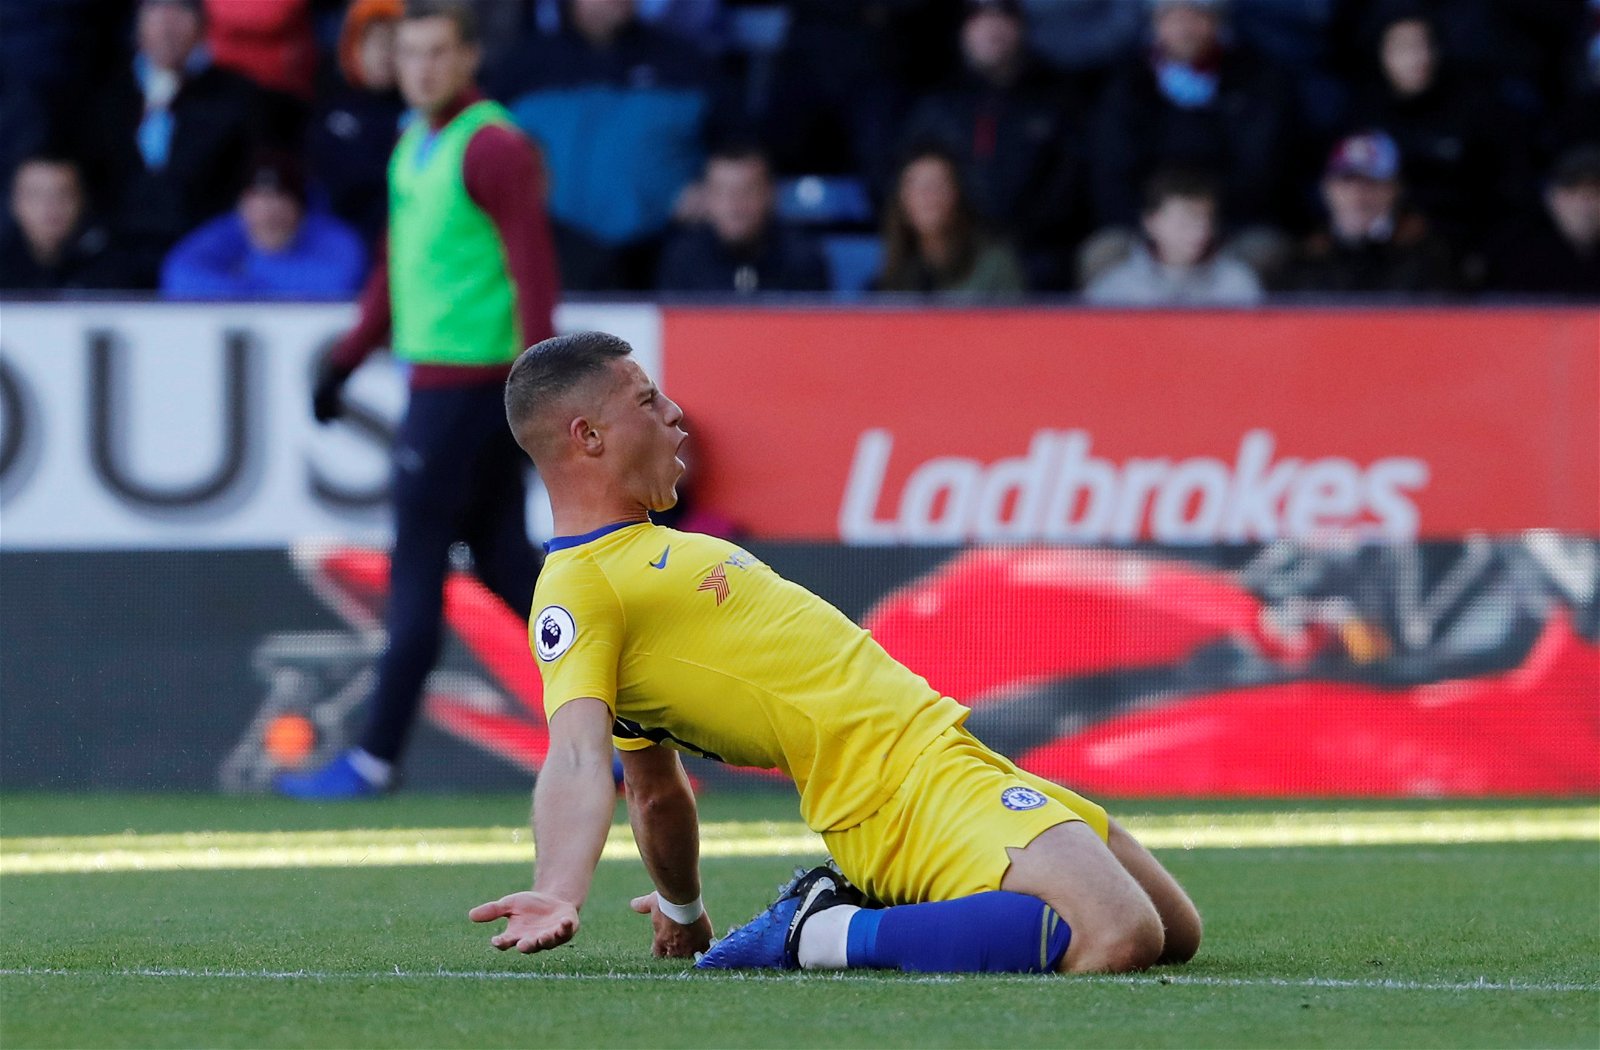 Maurizio Sarrri feels Barkley is a complete player now